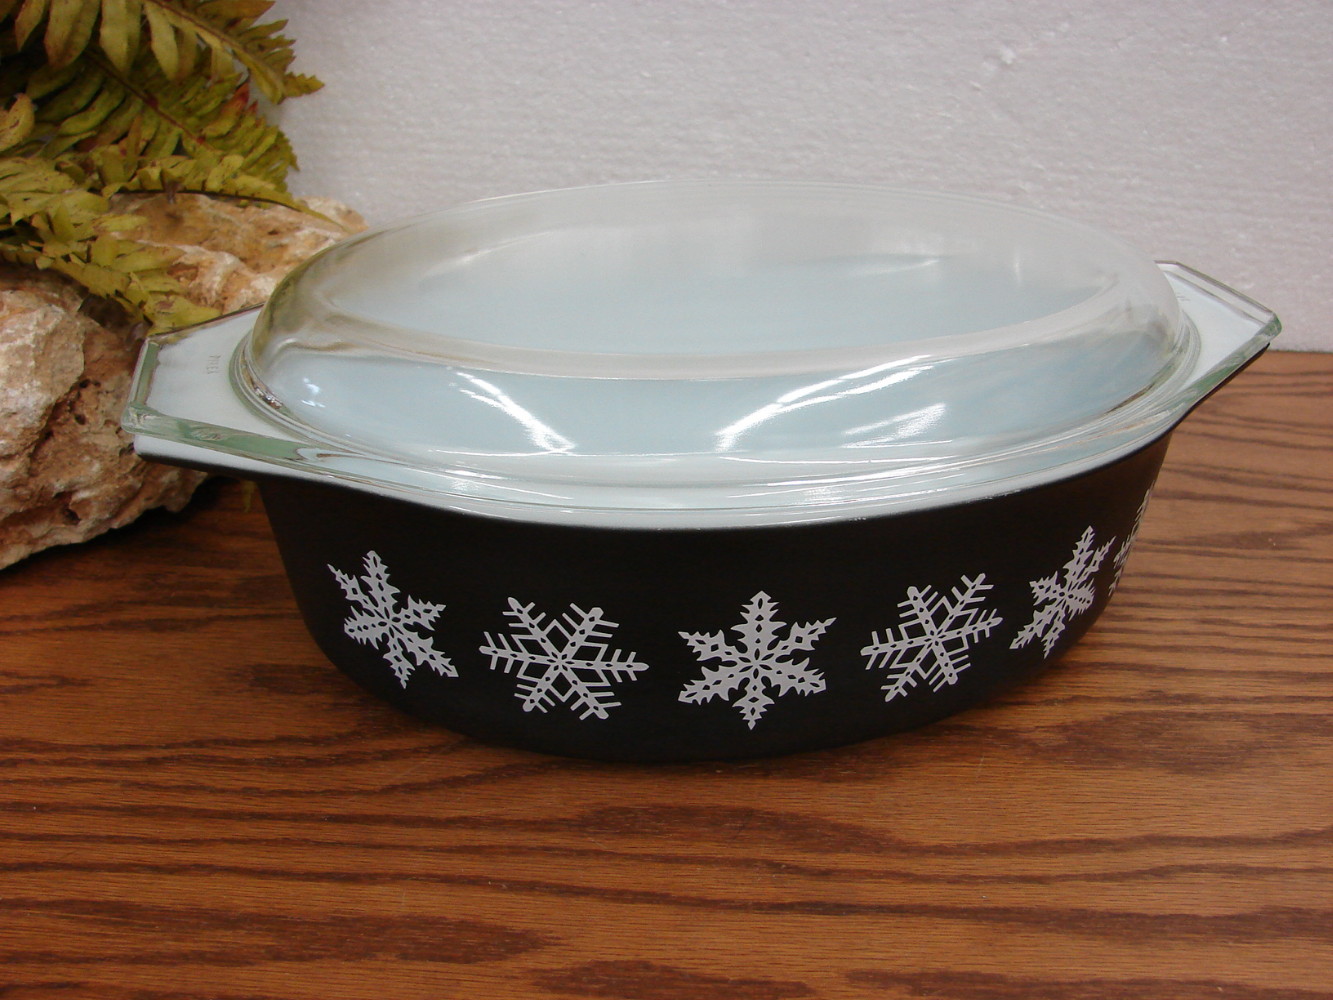 Pyrex Black Snowflake Oval Divided Casserole Baking Dish with